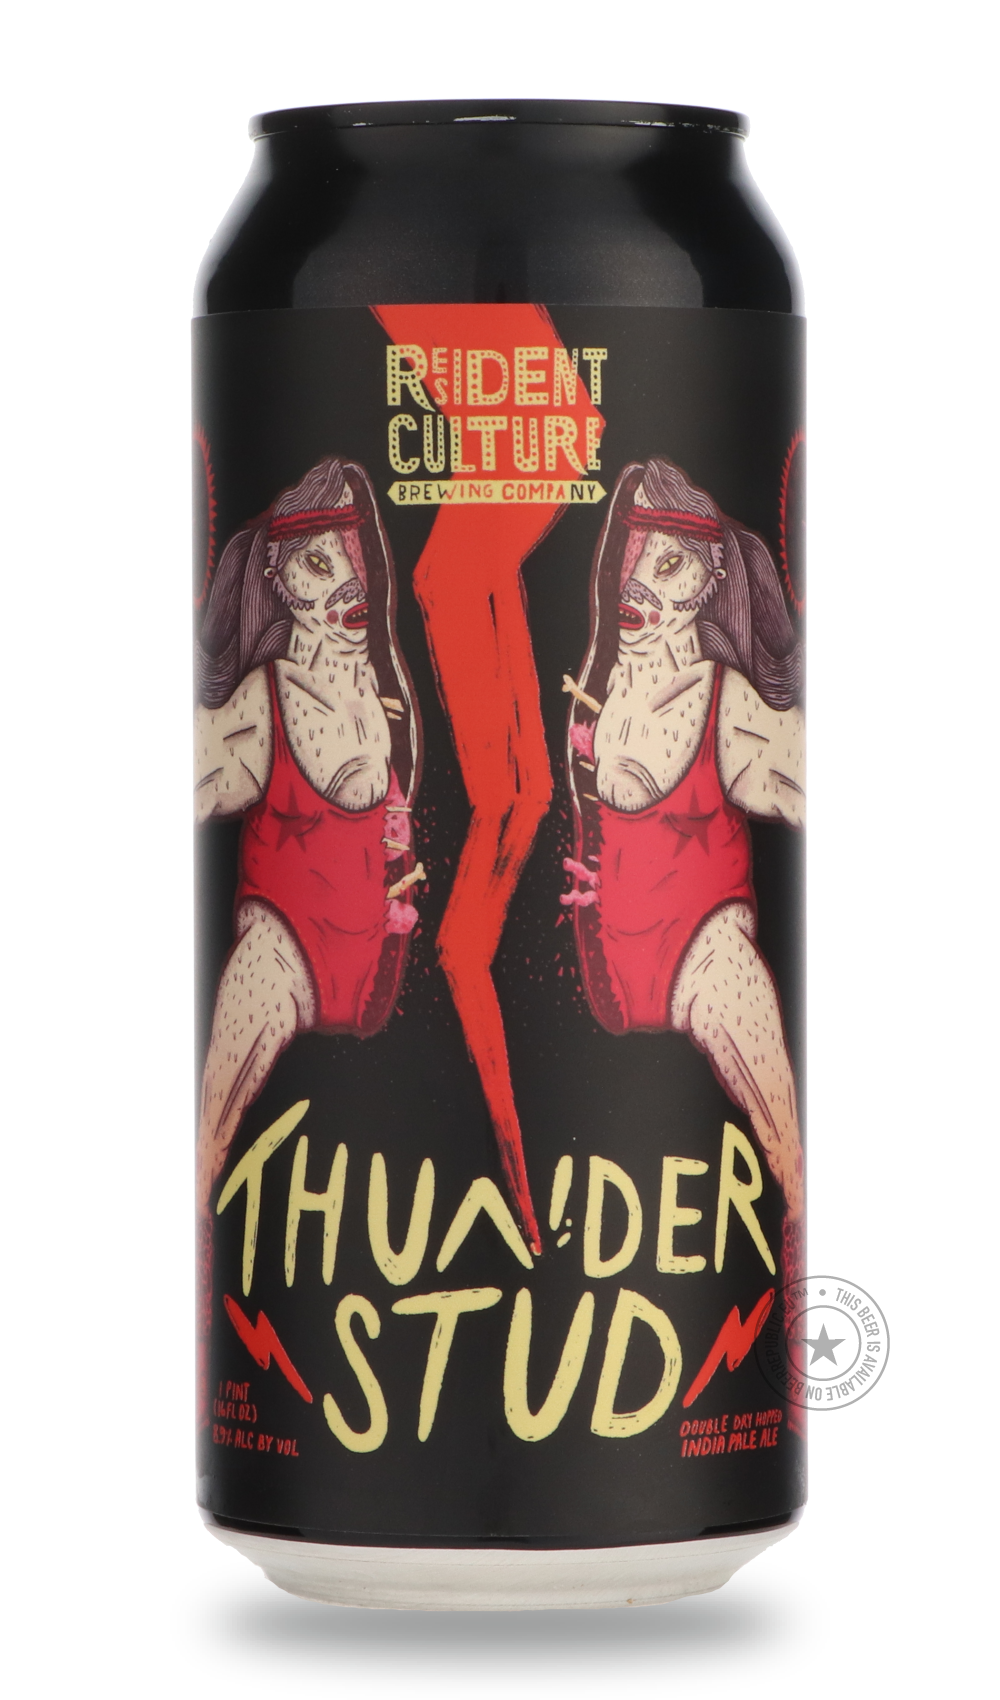 -Resident Culture- Thunder Stud-IPA- Only @ Beer Republic - The best online beer store for American & Canadian craft beer - Buy beer online from the USA and Canada - Bier online kopen - Amerikaans bier kopen - Craft beer store - Craft beer kopen - Amerikanisch bier kaufen - Bier online kaufen - Acheter biere online - IPA - Stout - Porter - New England IPA - Hazy IPA - Imperial Stout - Barrel Aged - Barrel Aged Imperial Stout - Brown - Dark beer - Blond - Blonde - Pilsner - Lager - Wheat - Weizen - Amber - B